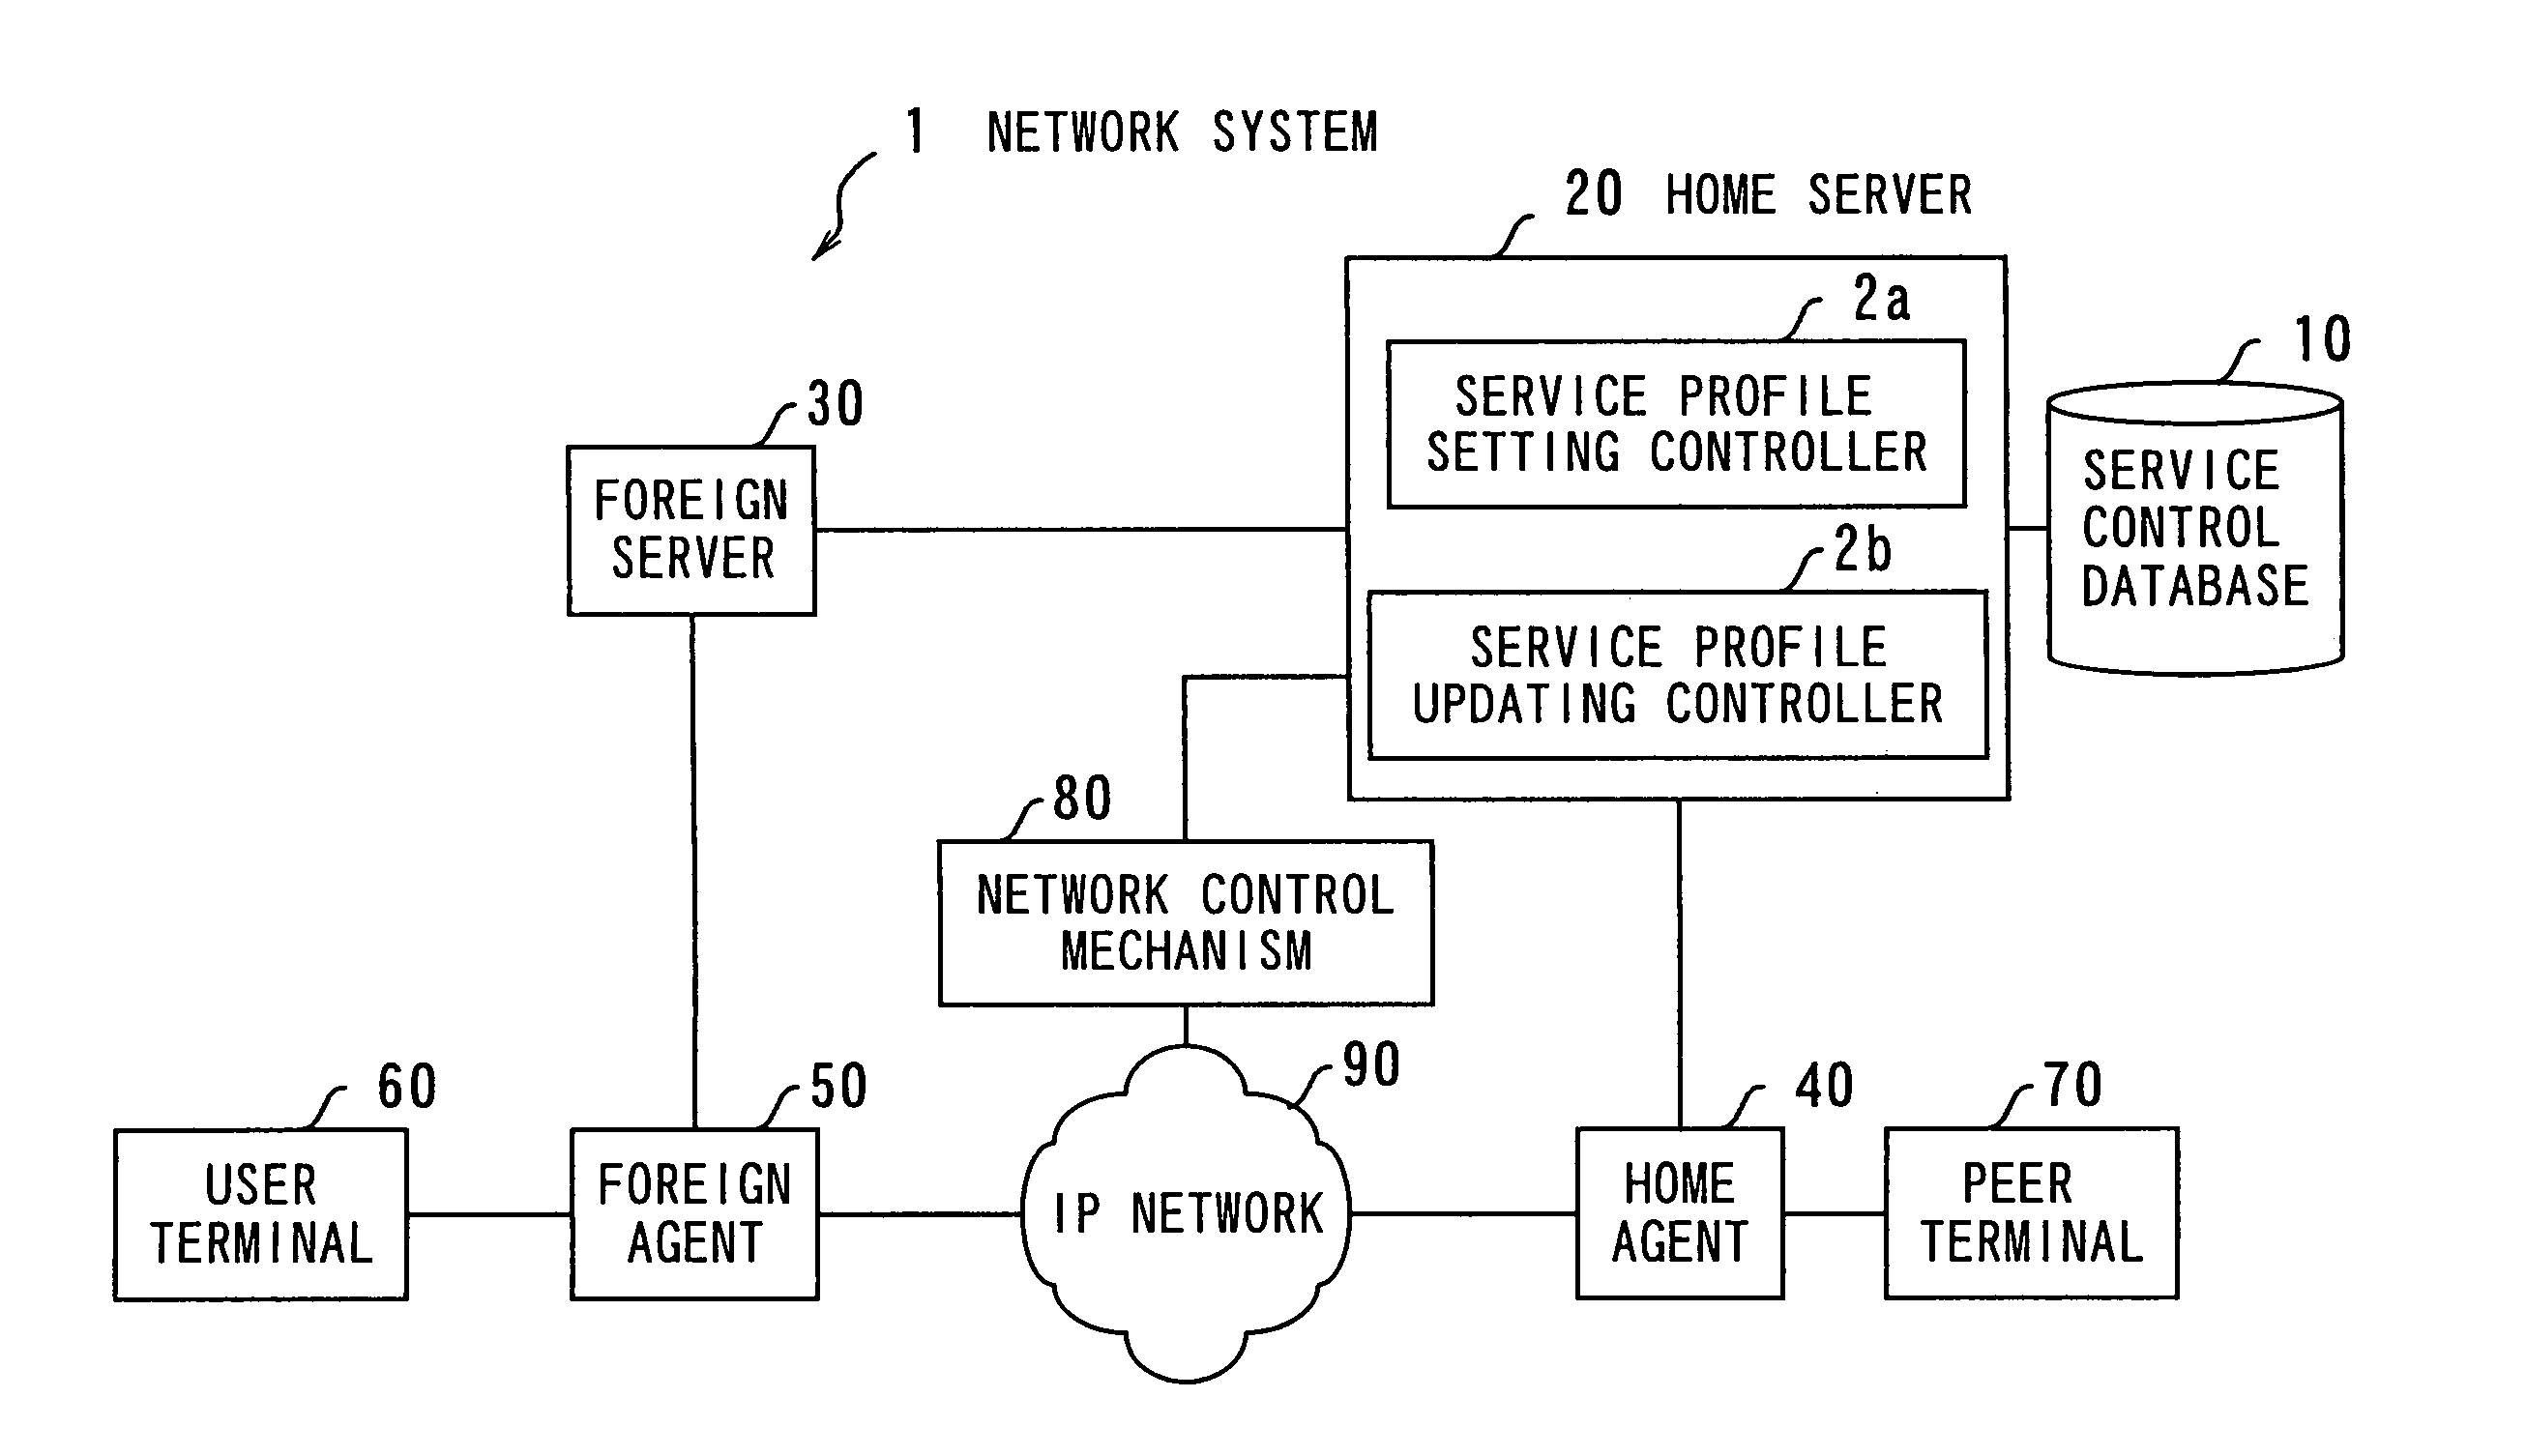 Network system with dynamic service profile updating functions